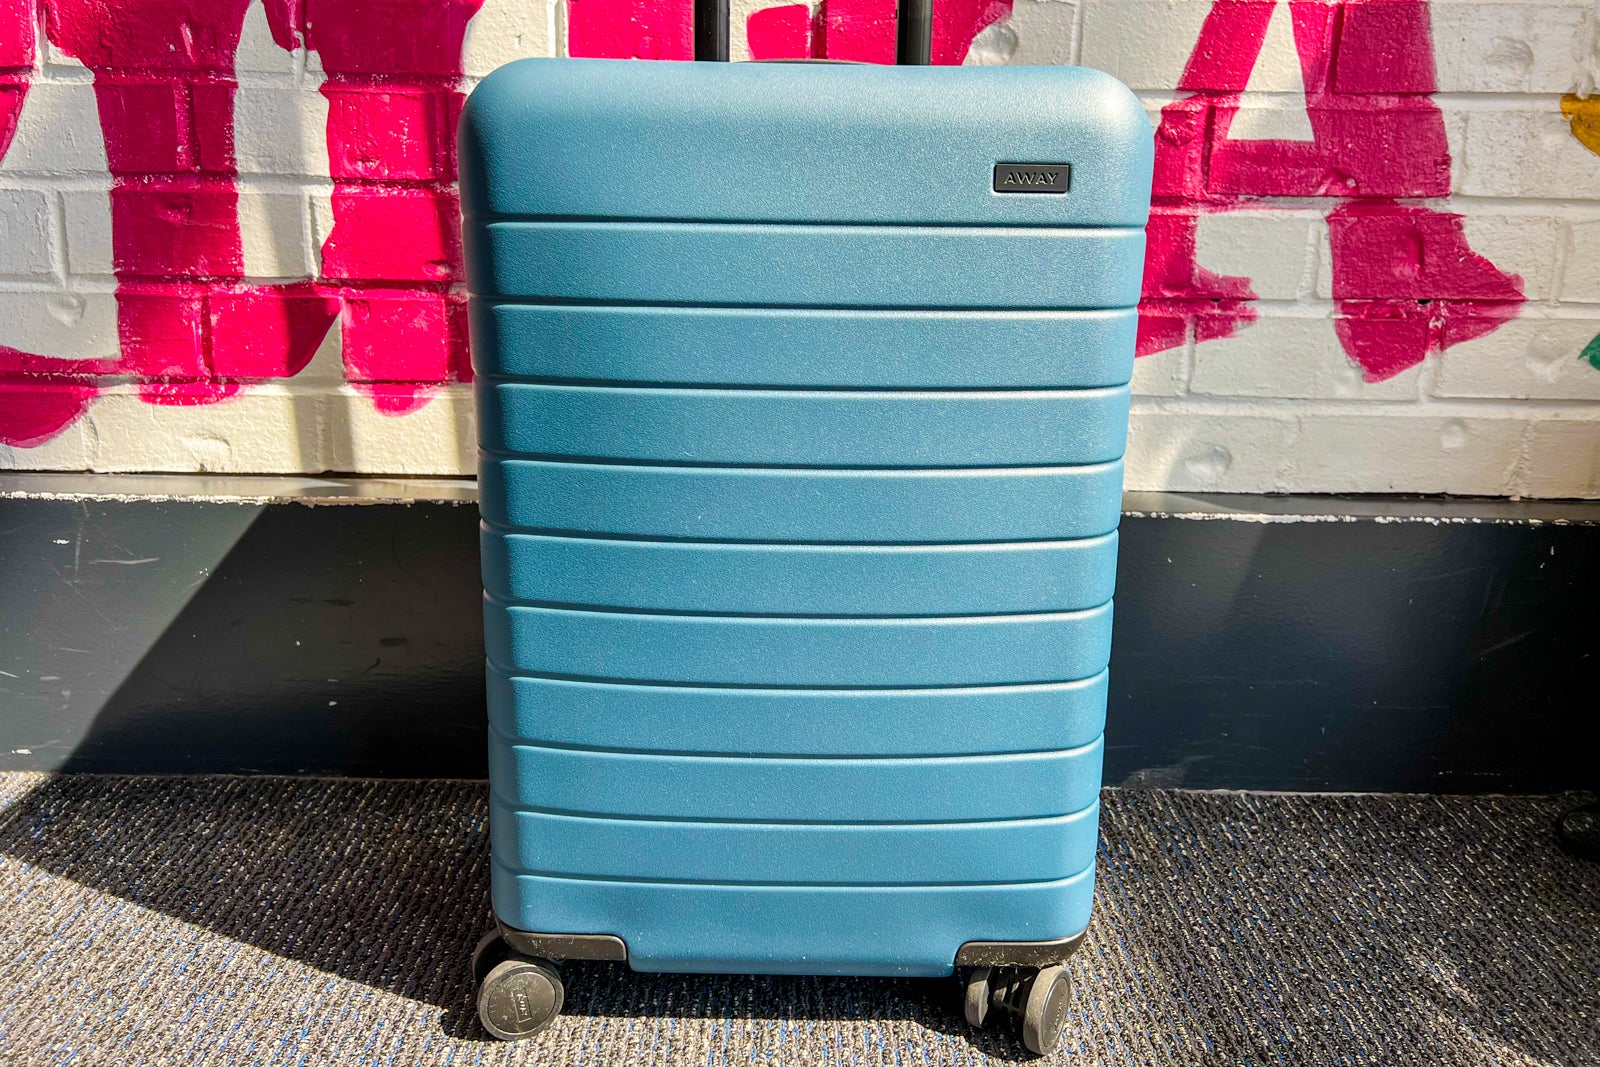 Review of Away's Bigger Carry-On - The Points Guy